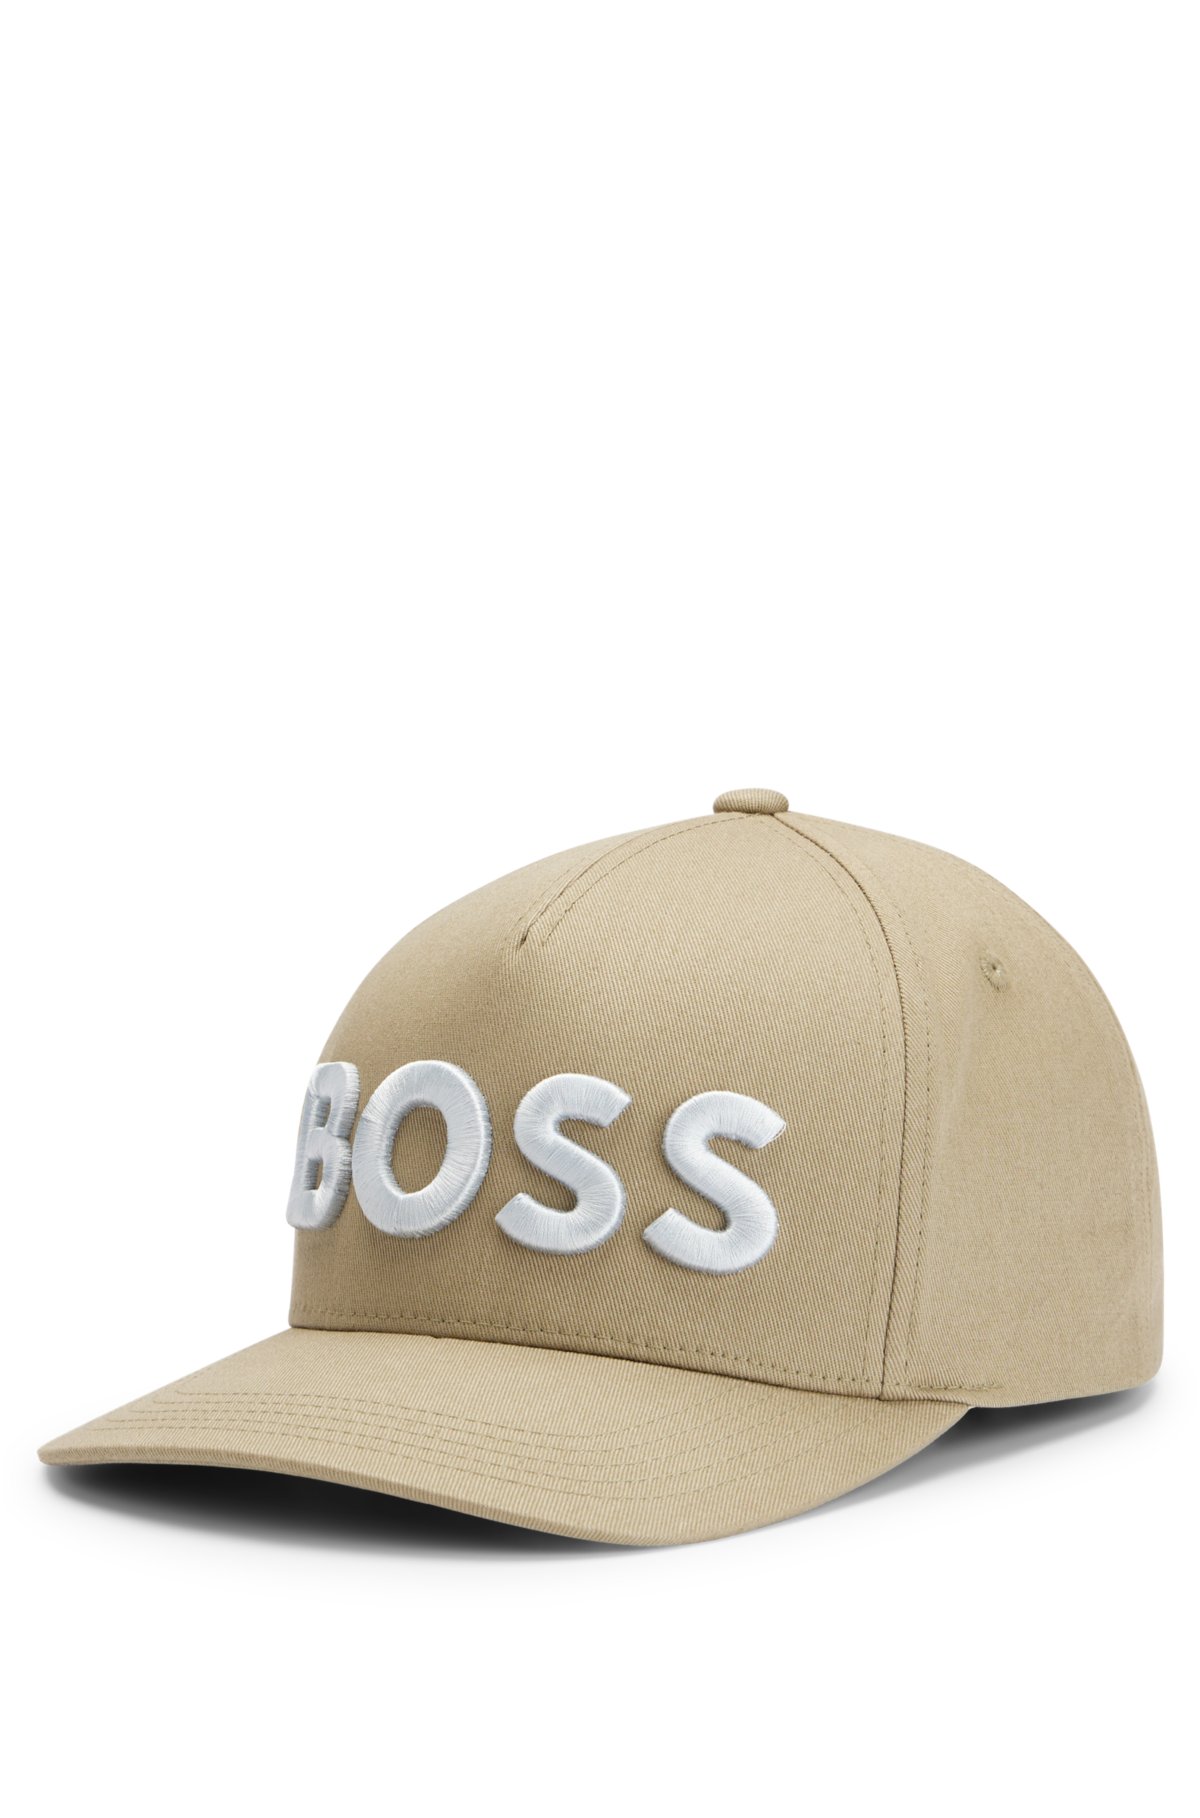 cap Cotton-twill BOSS adjustable strap embroidered - with and logo